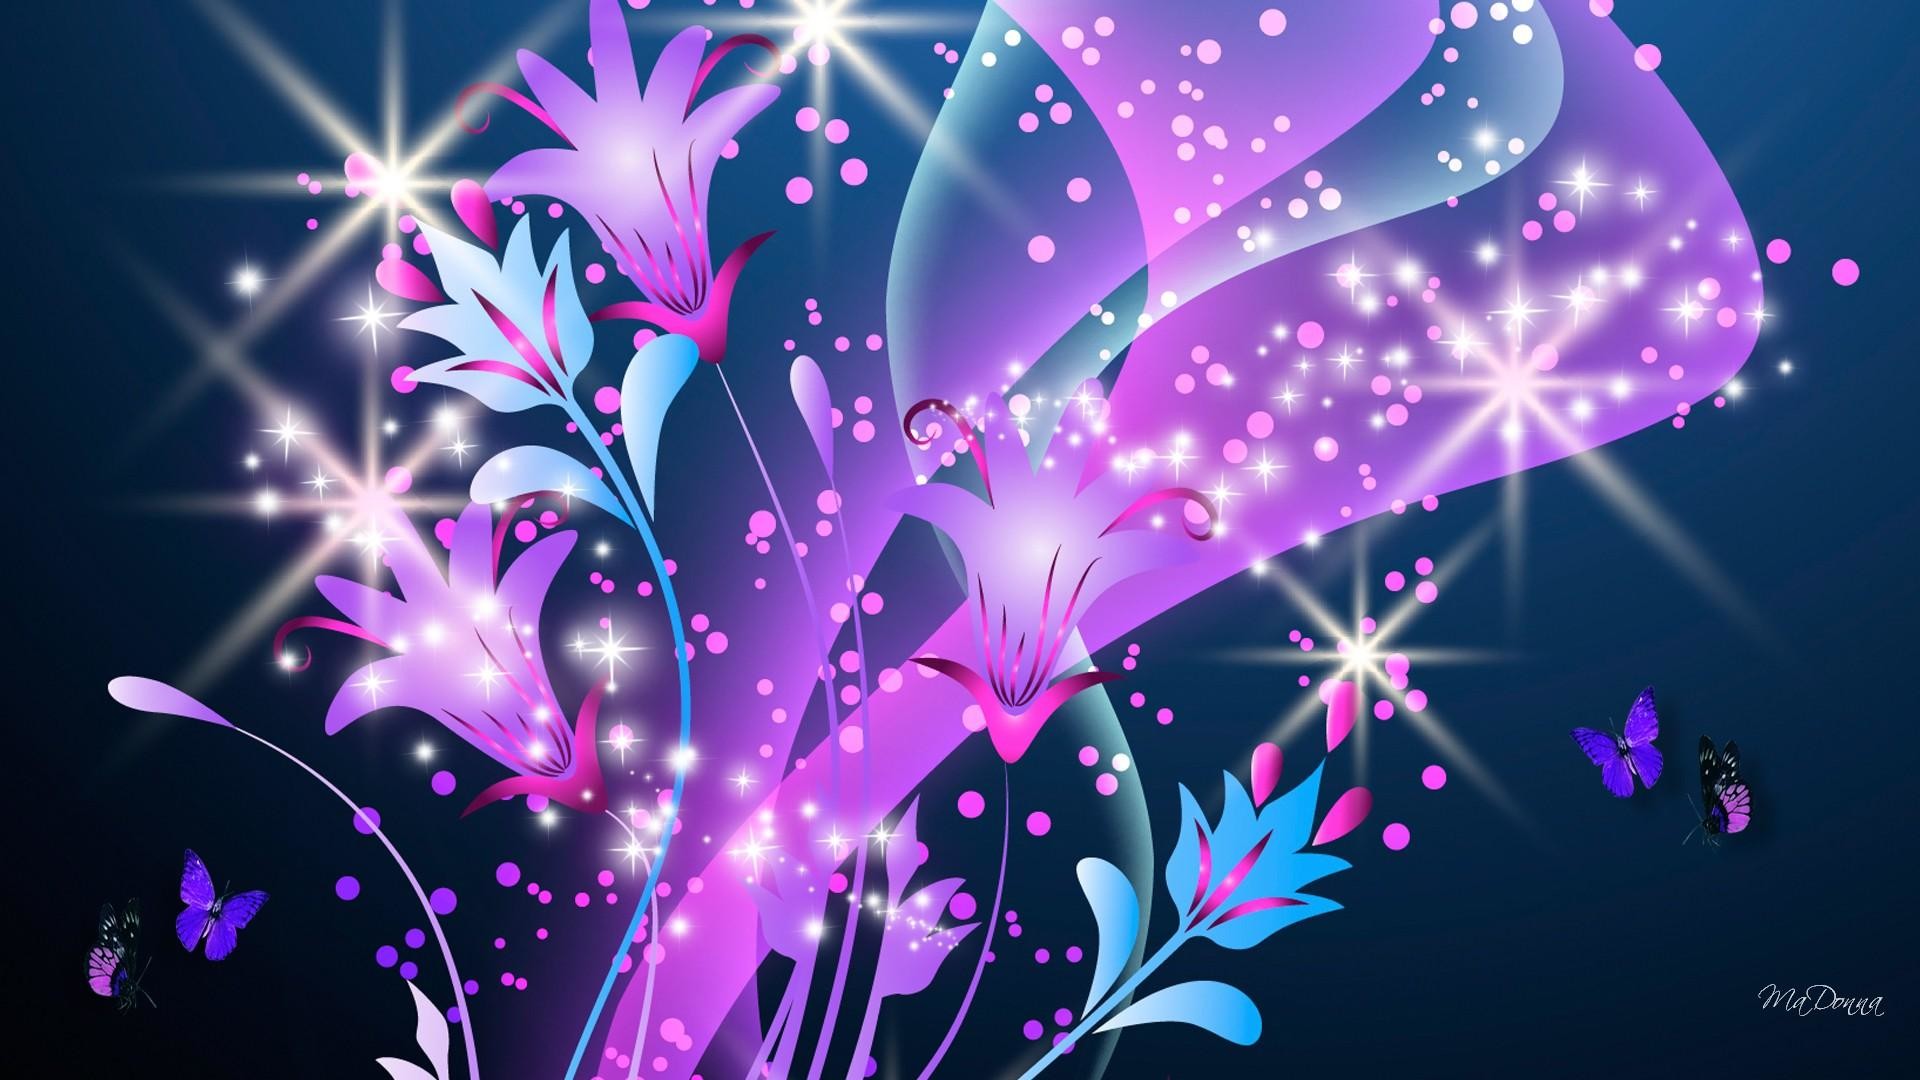 Explore Glitter Wallpaper, Butterfly Wallpaper, and more